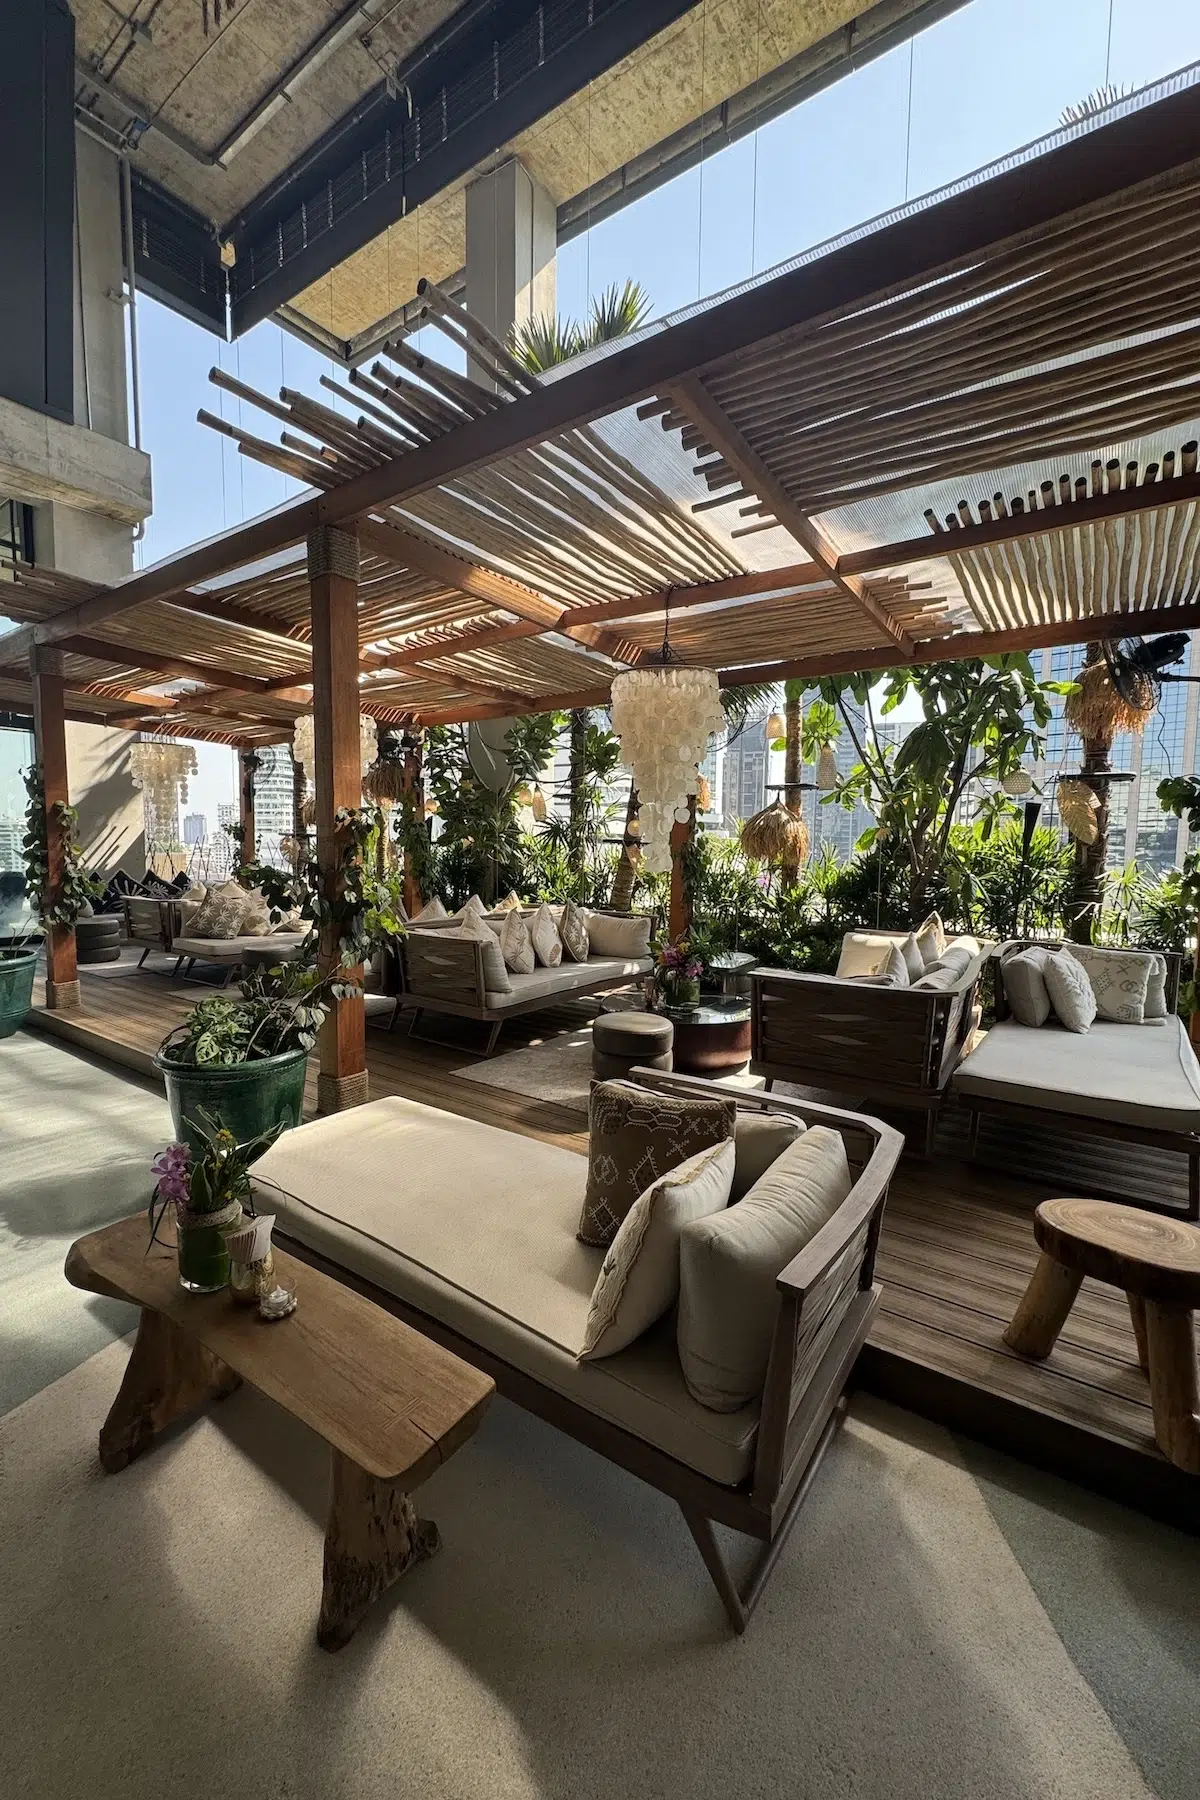 This photo shows the terrace's sofas from Tribe Sky Beach Club located at EmSphere in Bangkok. You can see a mexican-like decor. This place seems to have a cozy vibe atmosphere.